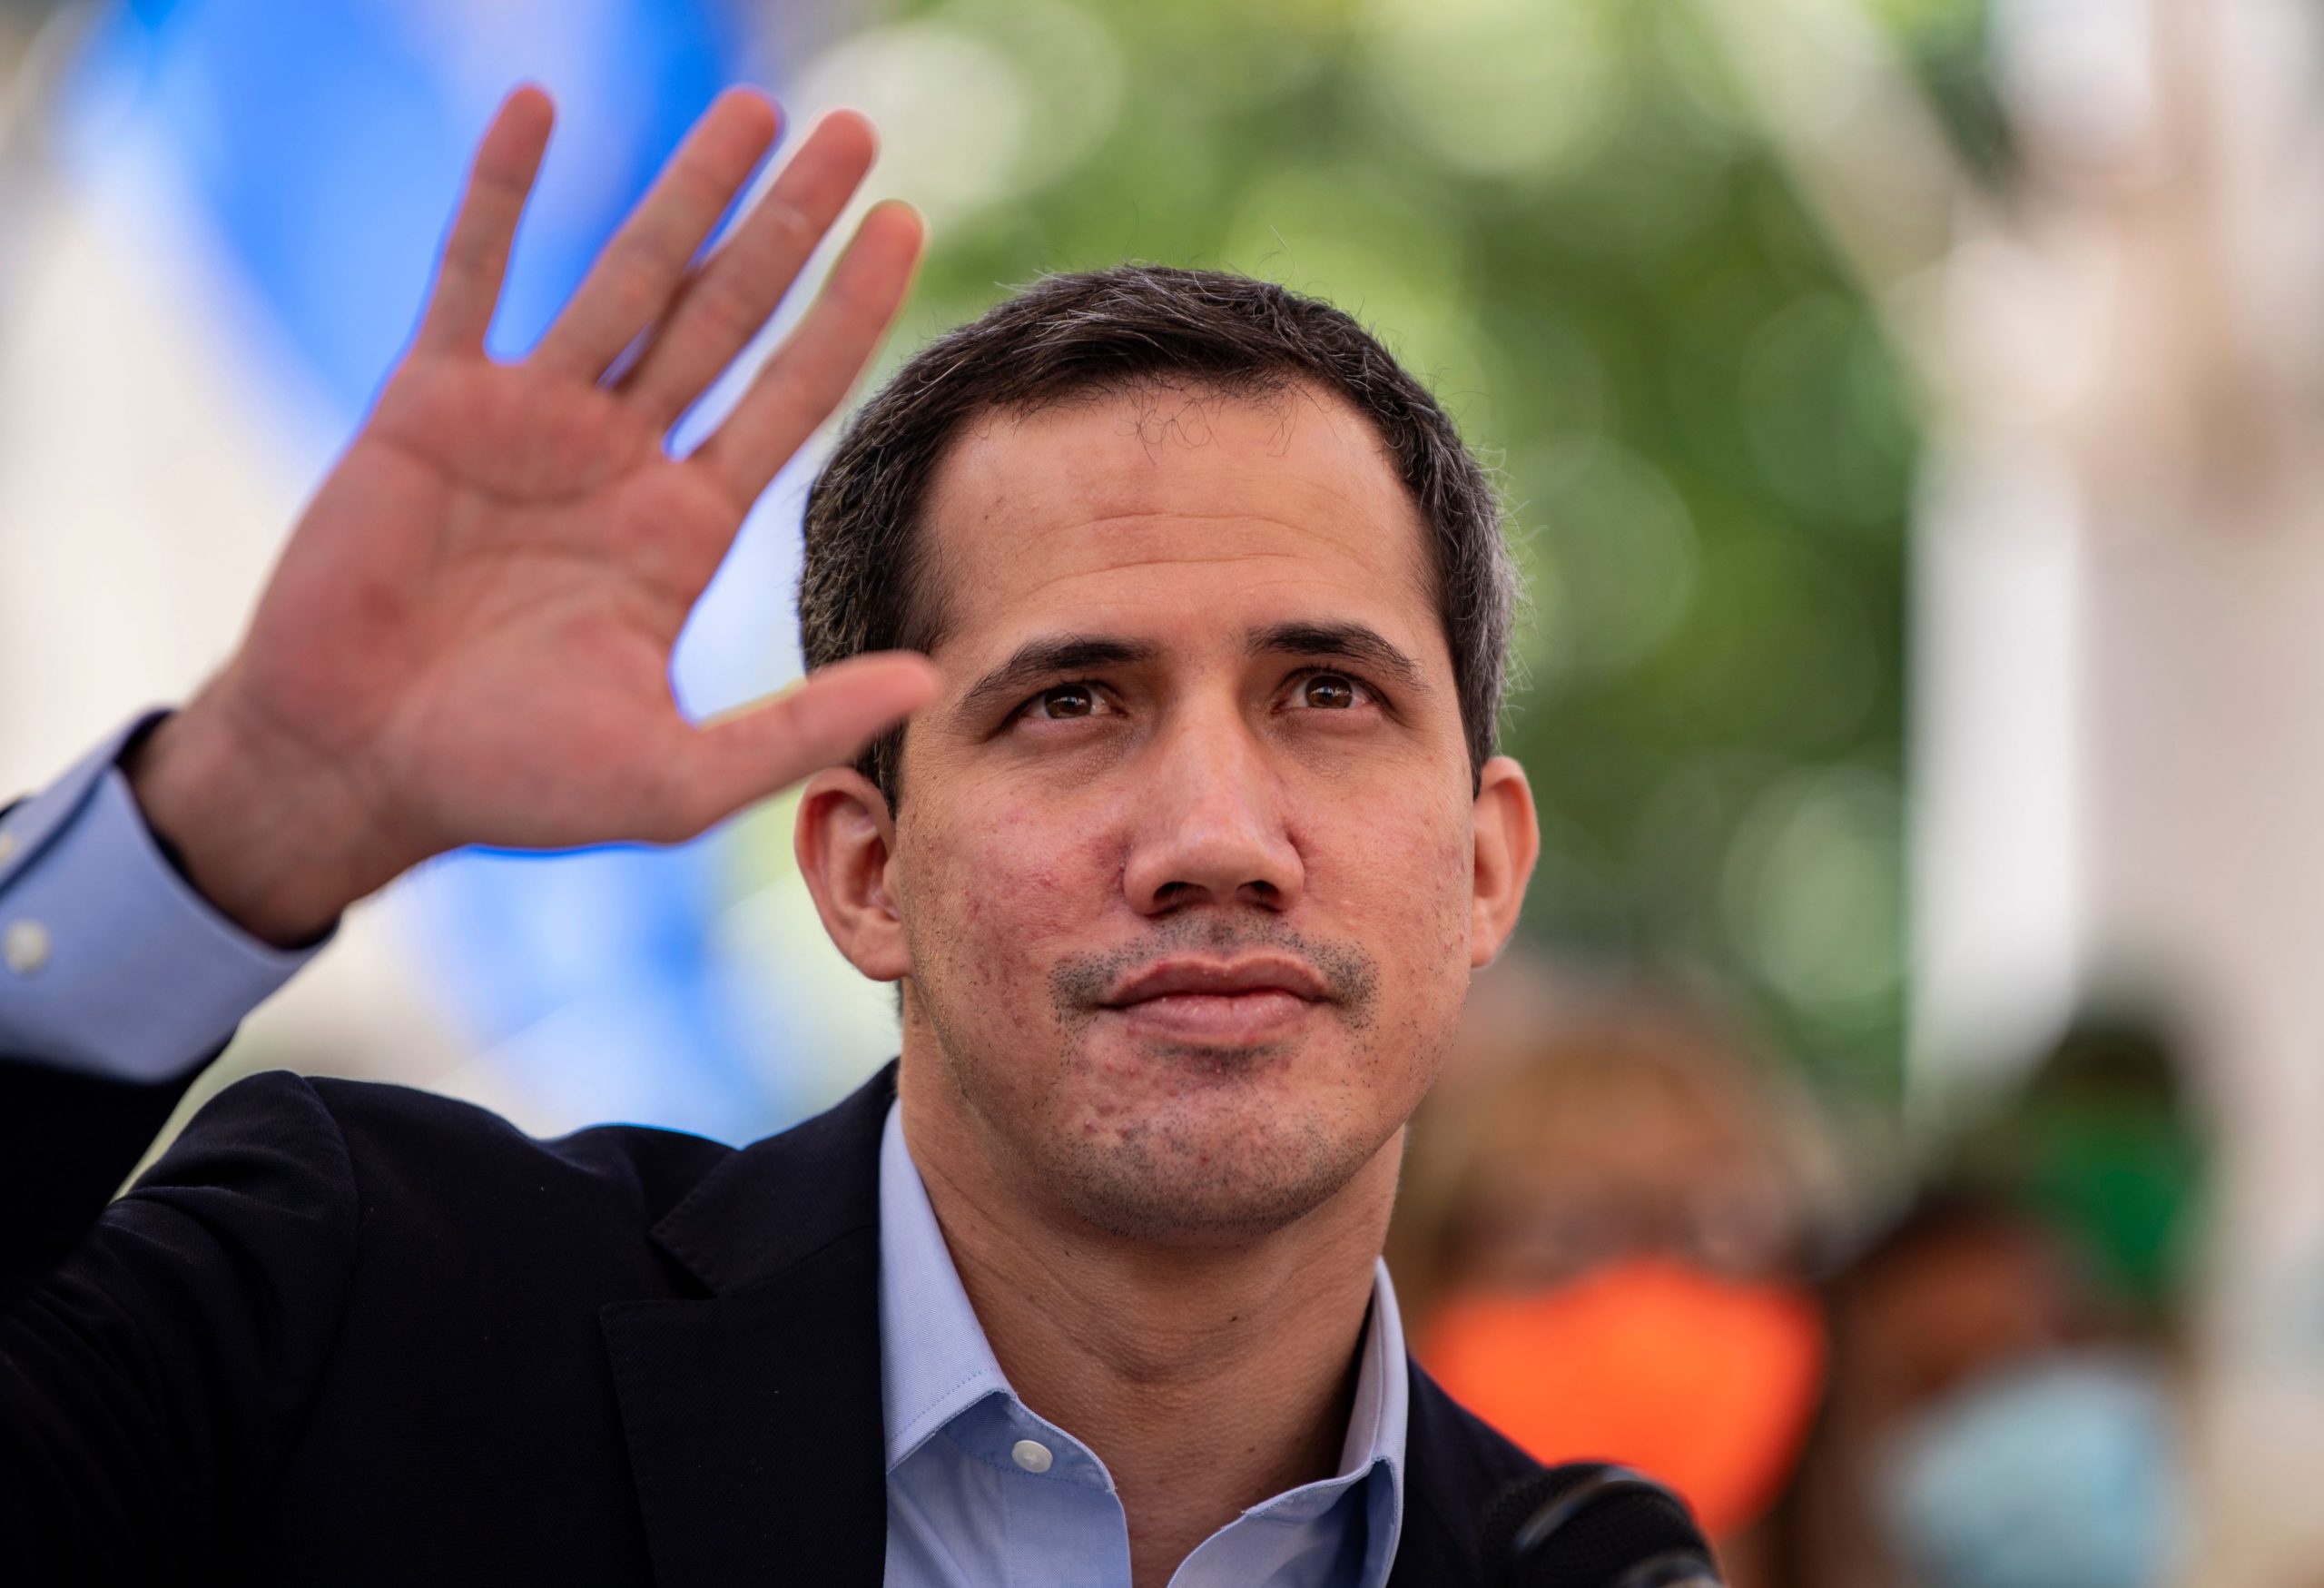 Venezuelan opposition leader Juan Guaido gestures while speaking during a press conference at the Los Palos Grandes square in Caracas on March 3, 2021. - US Secretary of State Antony Blinken spoke Tuesday with Venezuelan opposition leader Juan Guaido, whom Washington recognizes as interim president, and proposed working with allies to increase "multilateral pressure" against Venezuelan president Nicolas Maduro. (Photo by YURI CORTEZ/AFP via Getty Images)